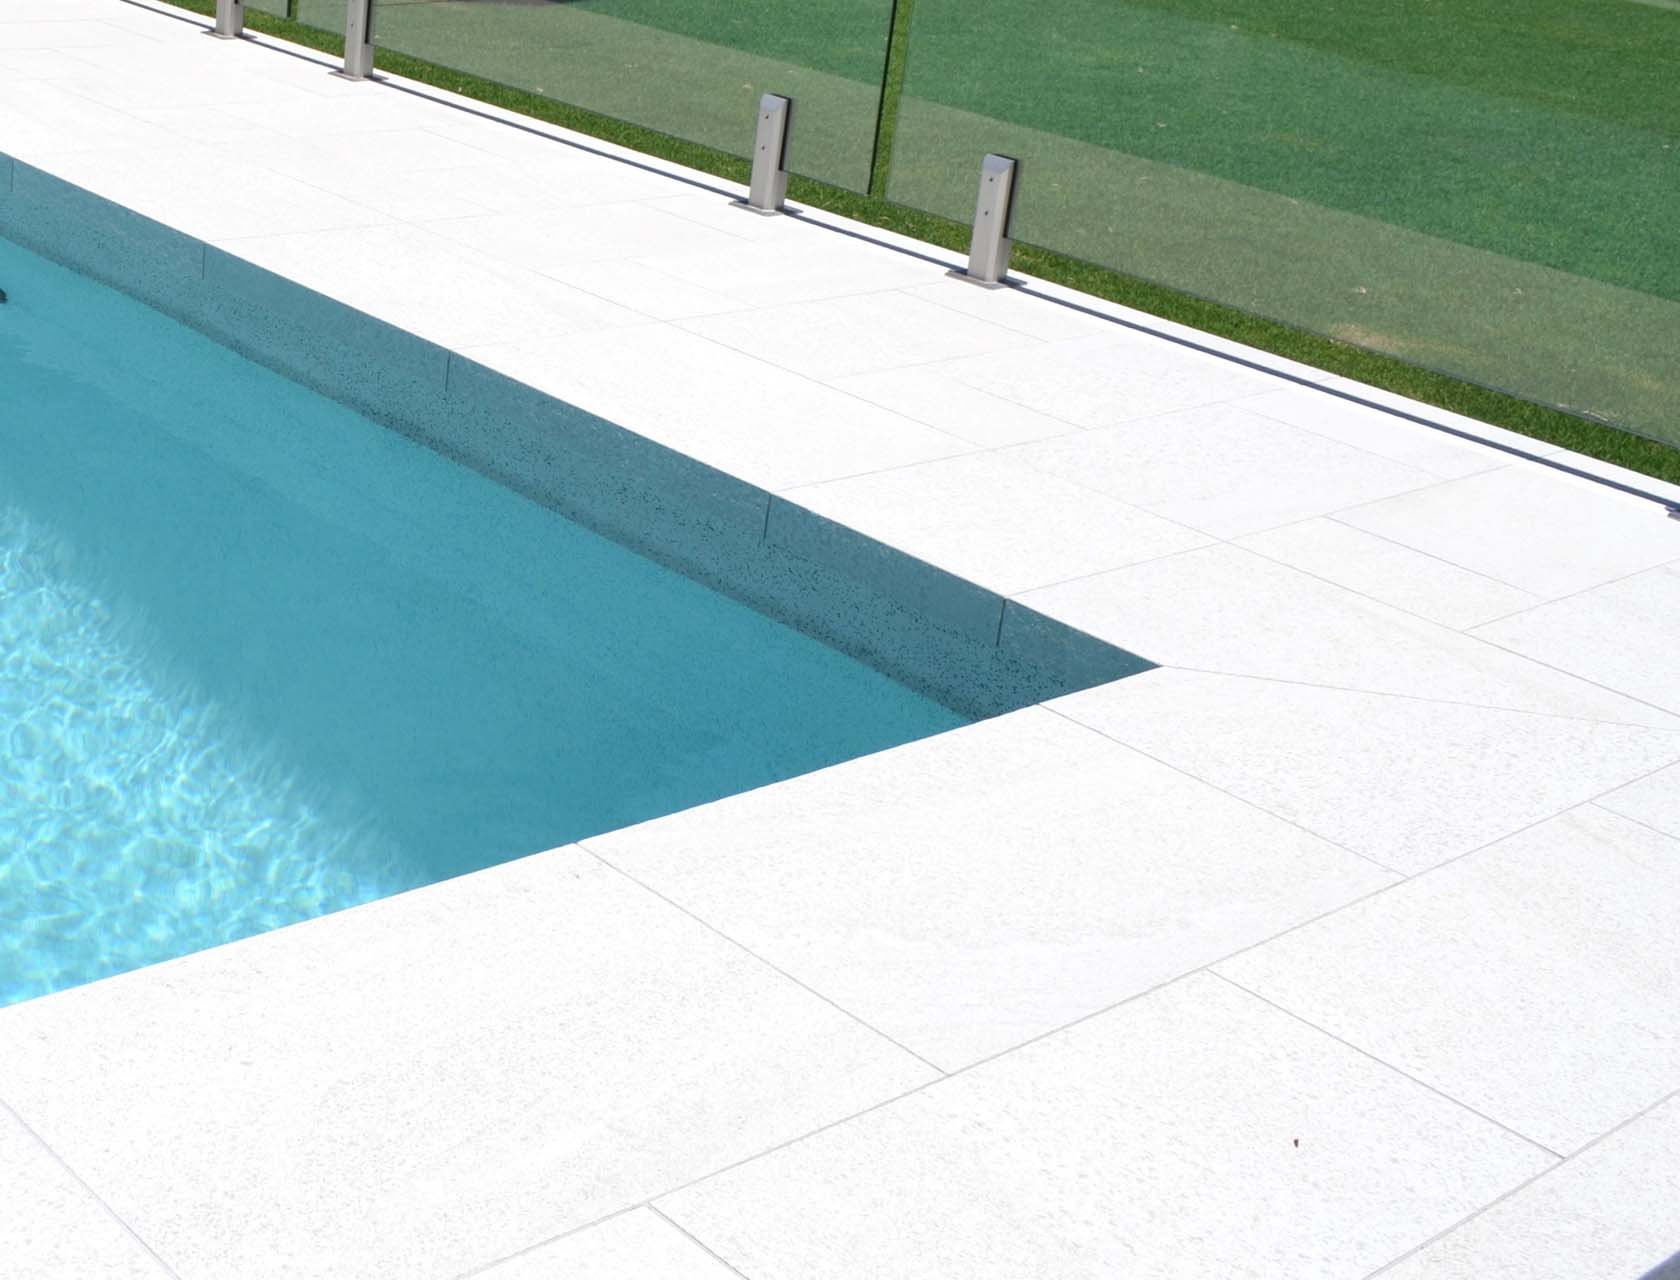 Coconut Drift Porcelain Dropface pool coping and surround tiles